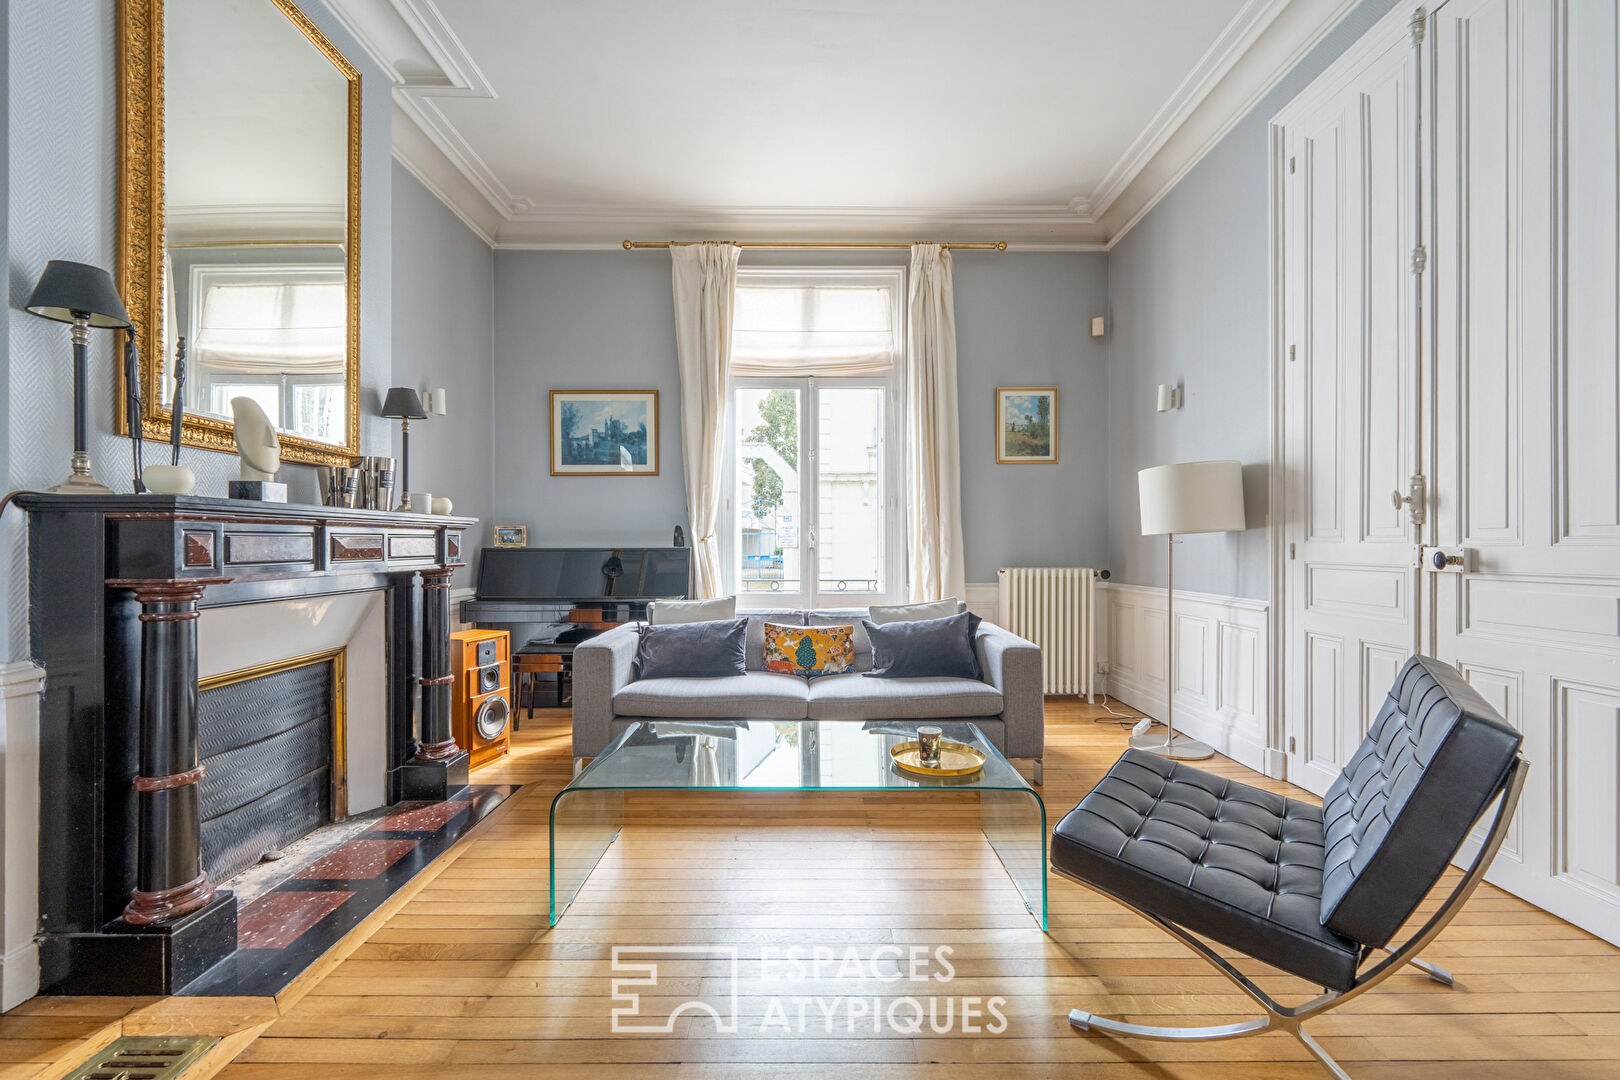 Large family home in the heart of Prébendes